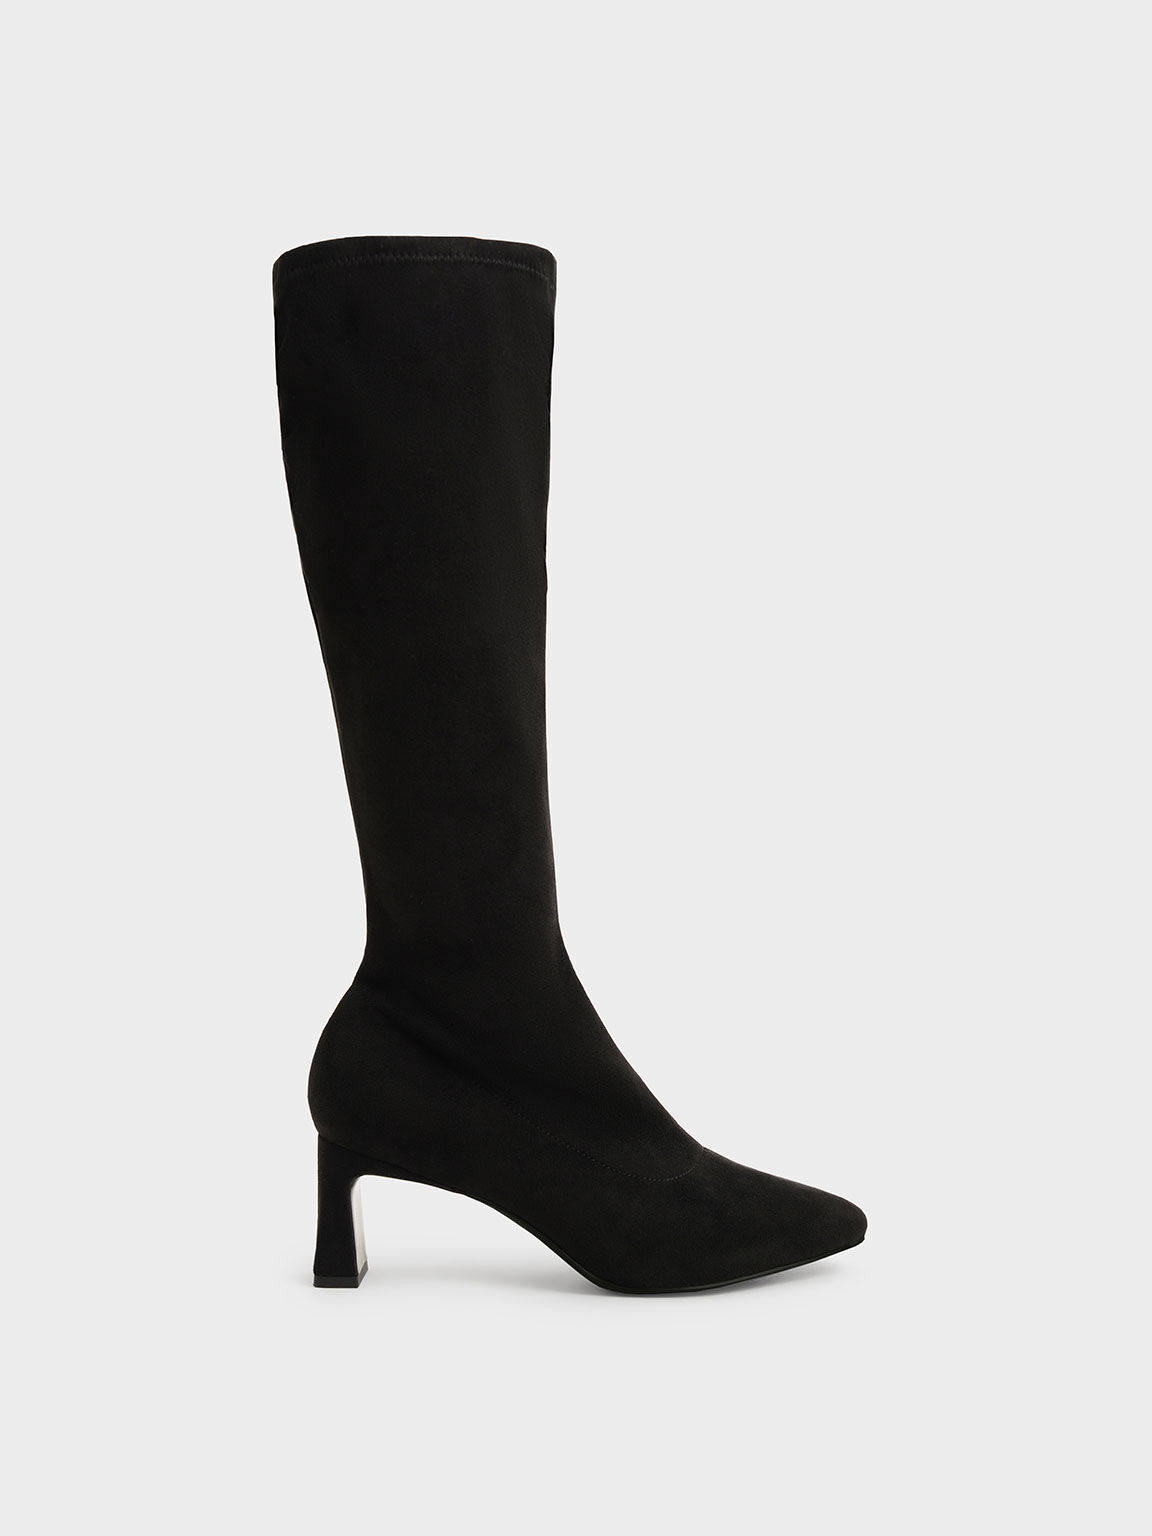 Women's Boots | Shop Exclusive Styles - CHARLES & KEITH US